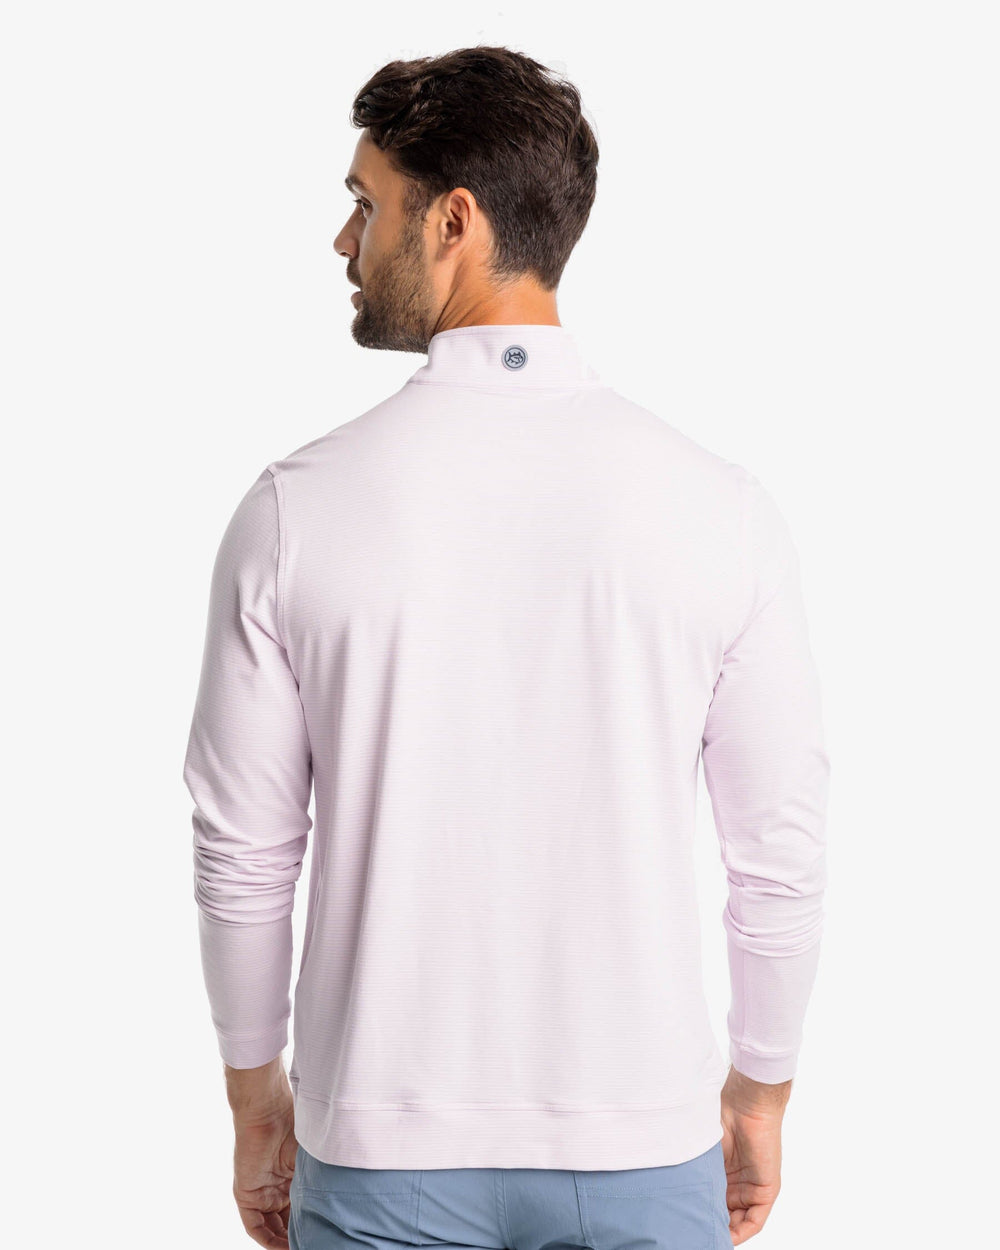 The back view of the Southern Tide Cruiser Heather Micro-Stripe Performance Quarter Zip by Southern Tide - Heather Rose Blush